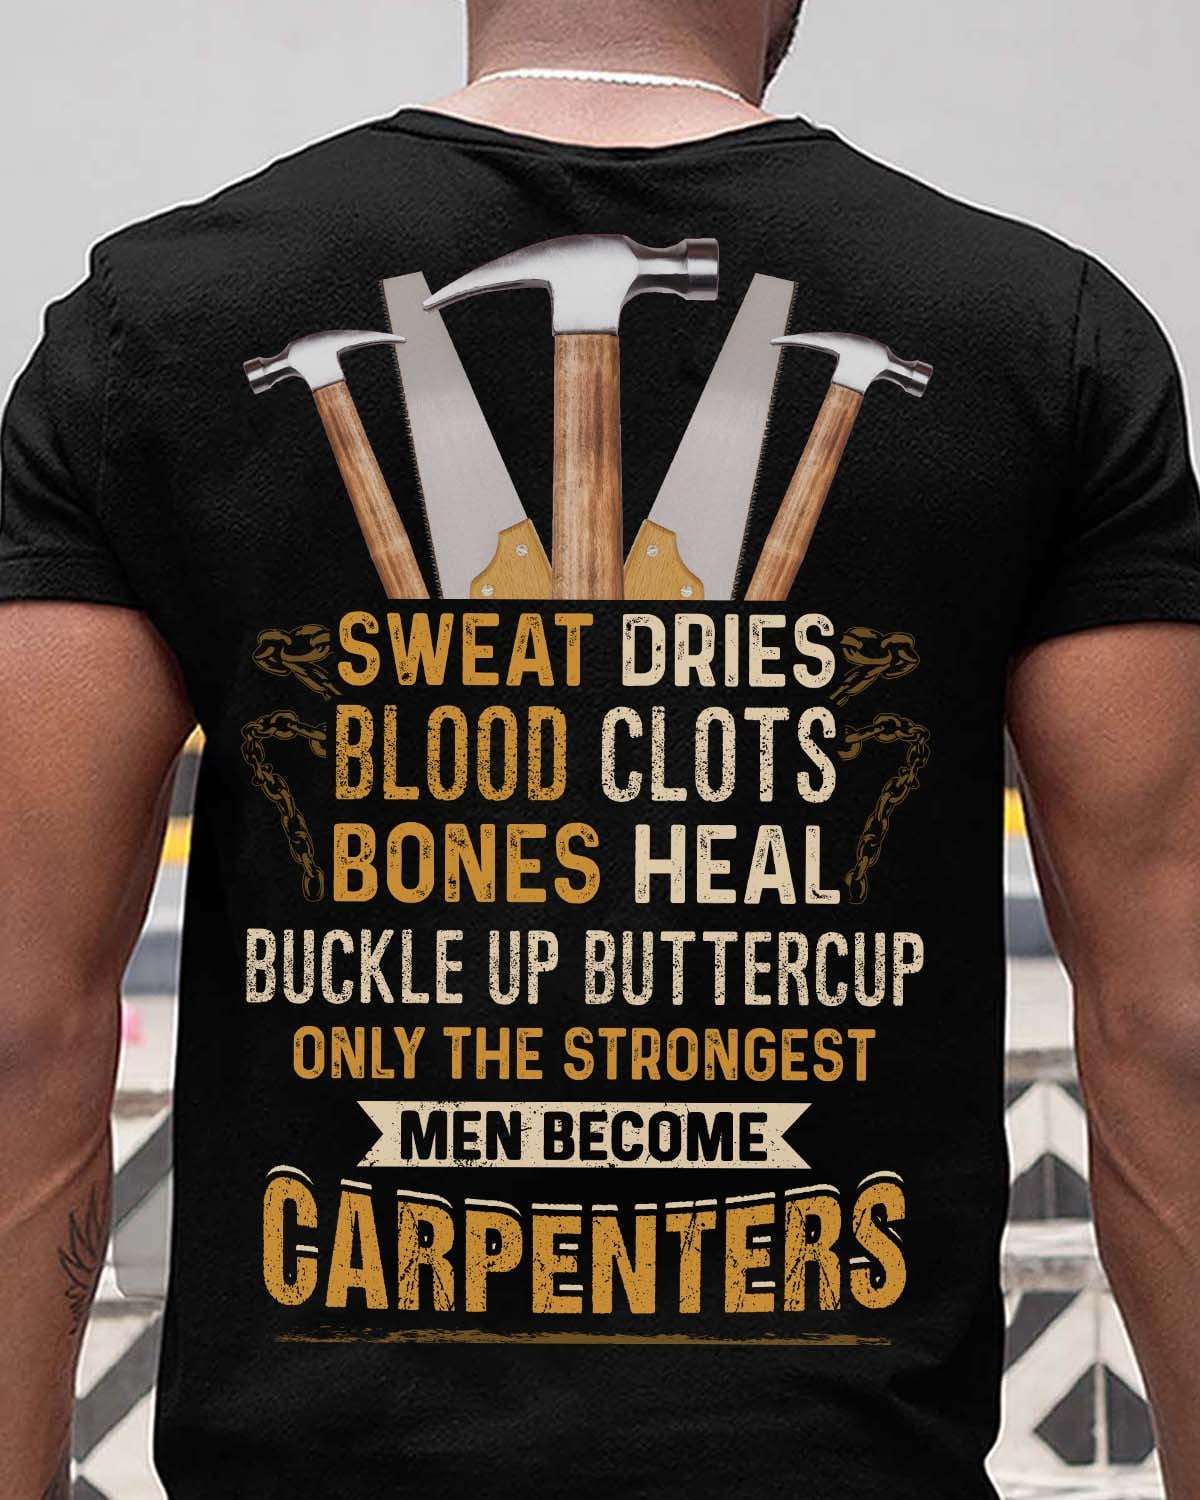 Sweat dries blood clots bones heal - Only the strongest men become carpenters, carpenter the job